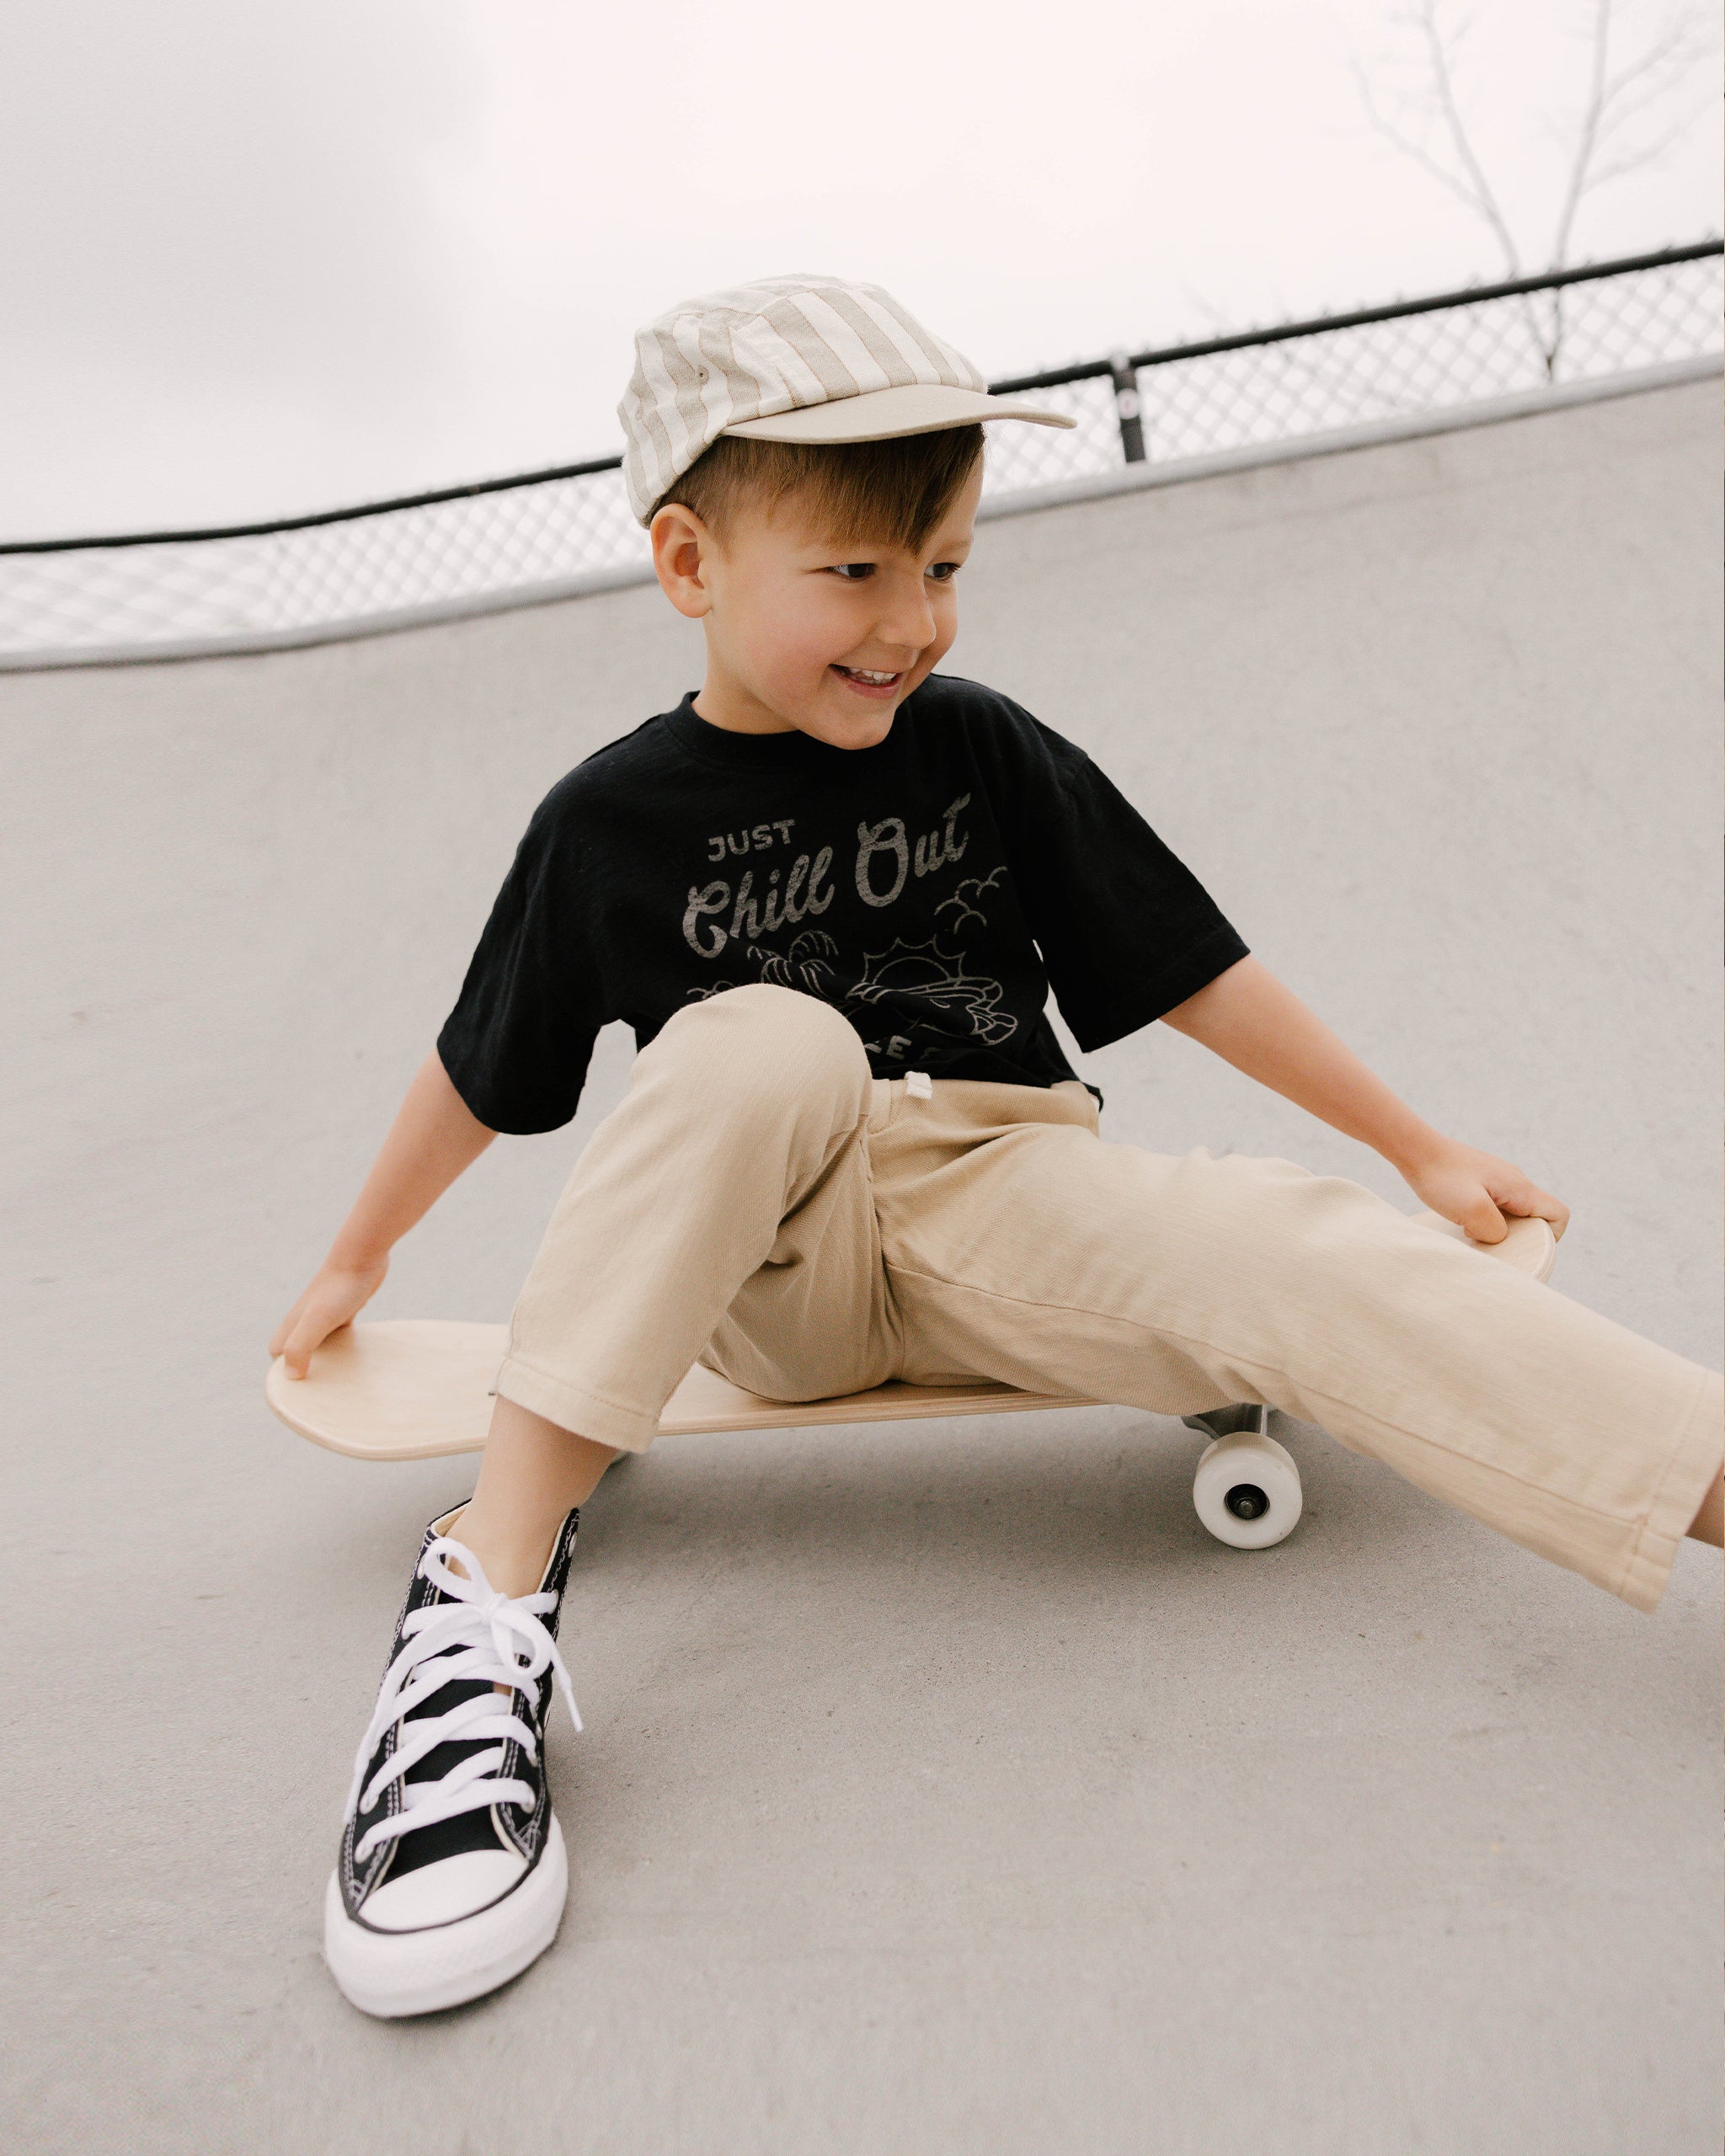 Relaxed Tee || Rylee – + Chill Out Cru